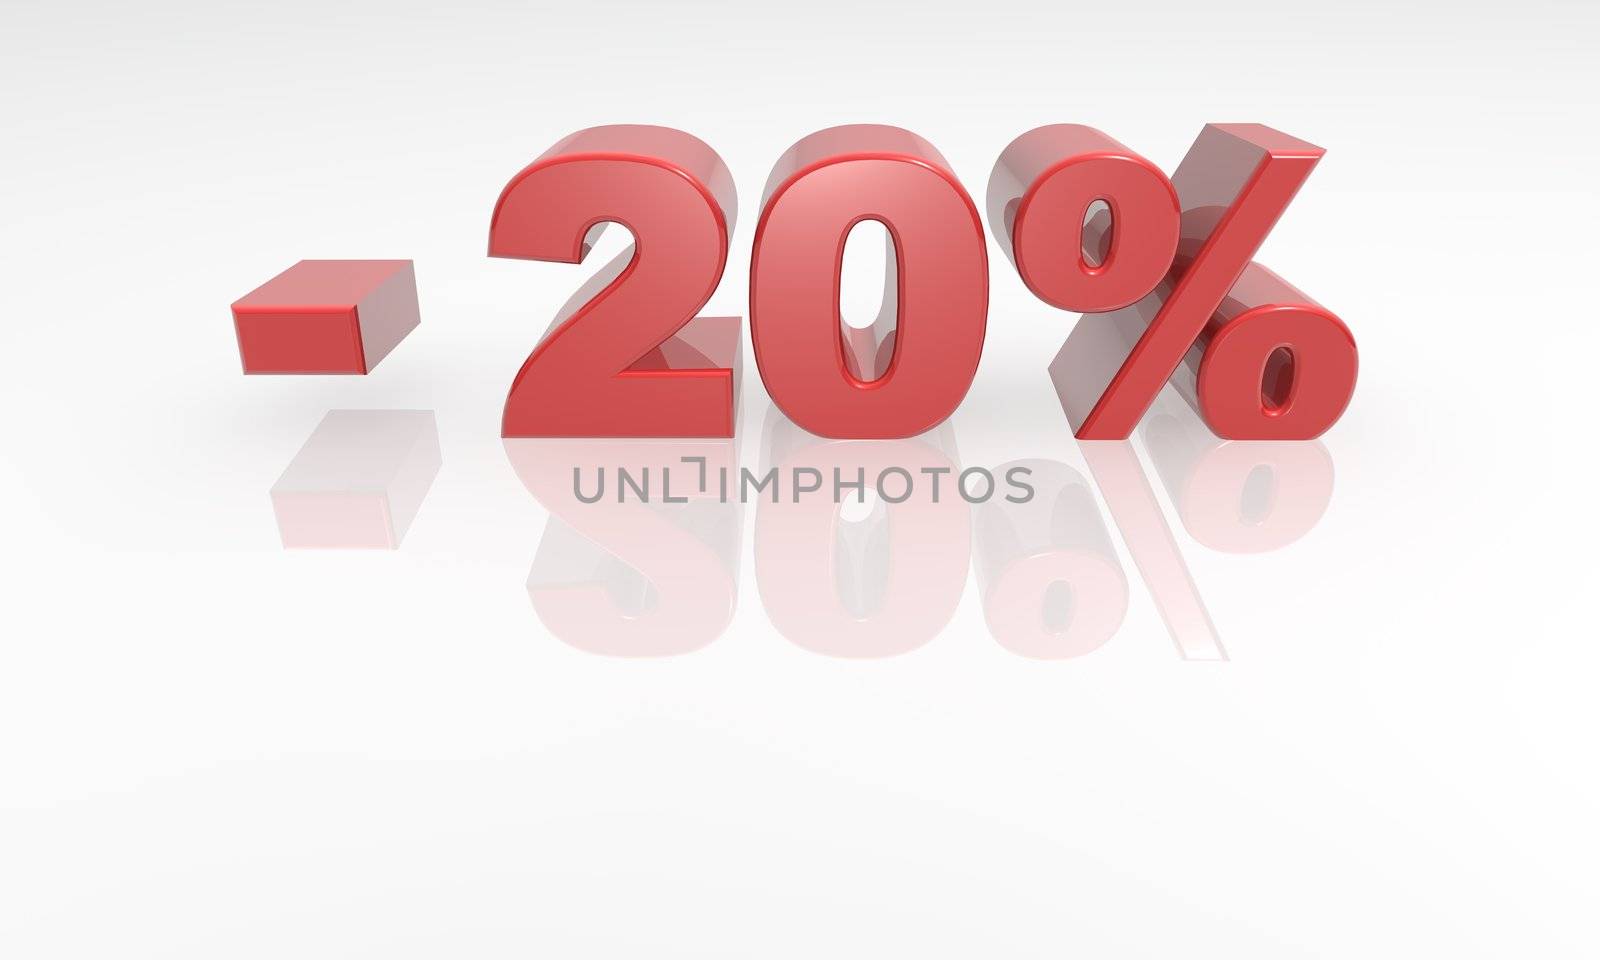 20% off - red 3d text by jeremywhat